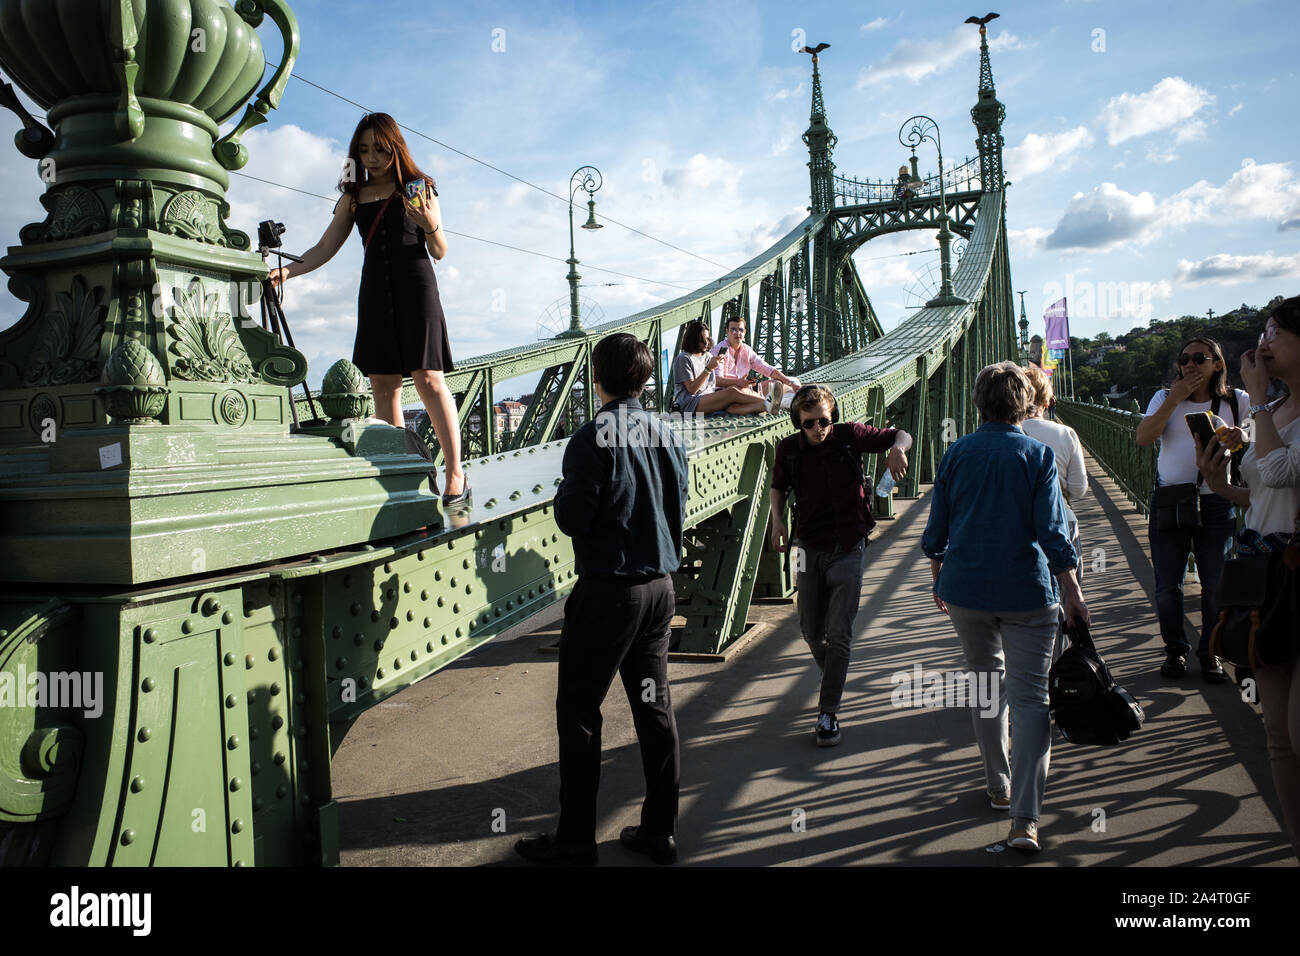 SZABADSAG HID BRIDGE BUDAPEST - 1894-1896 DESIGNED BY ARCHITECT JANOS FEKETEHAZY - TOURIST, LOVERS SEATING ON THE IRON BRIDGE STRUCTURE DURING A SUNNY DAY - BUDAPEST CITY - BUDAPEST BRIDGE - BUDAPEST STREET PHOTOGRAPHY - HUNGARY © Frédéric BEAUMONT Stock Photo